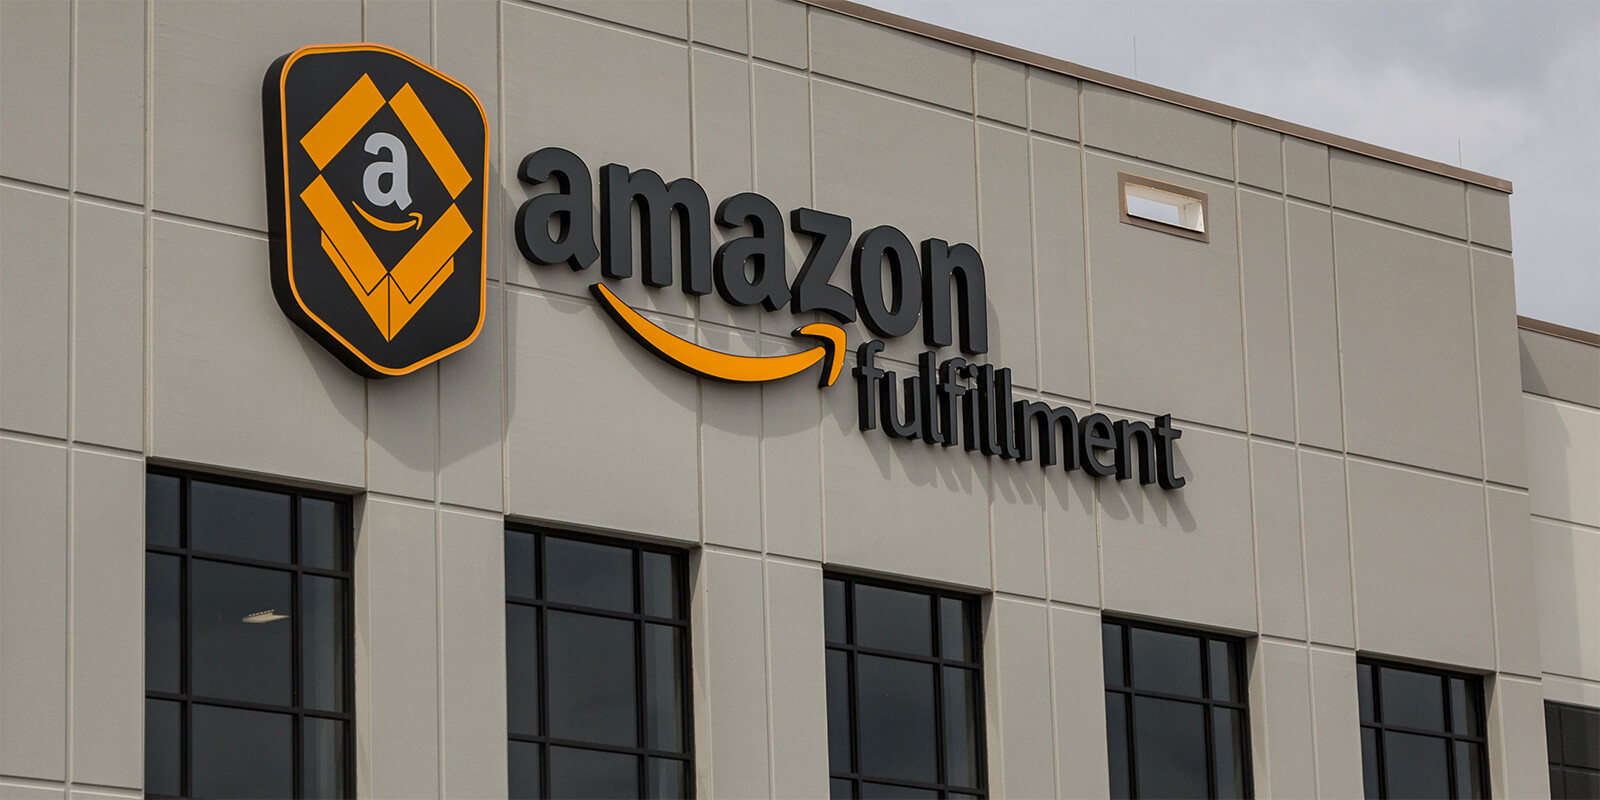 AFSCME supports Amazon workers seeking a voice on the job